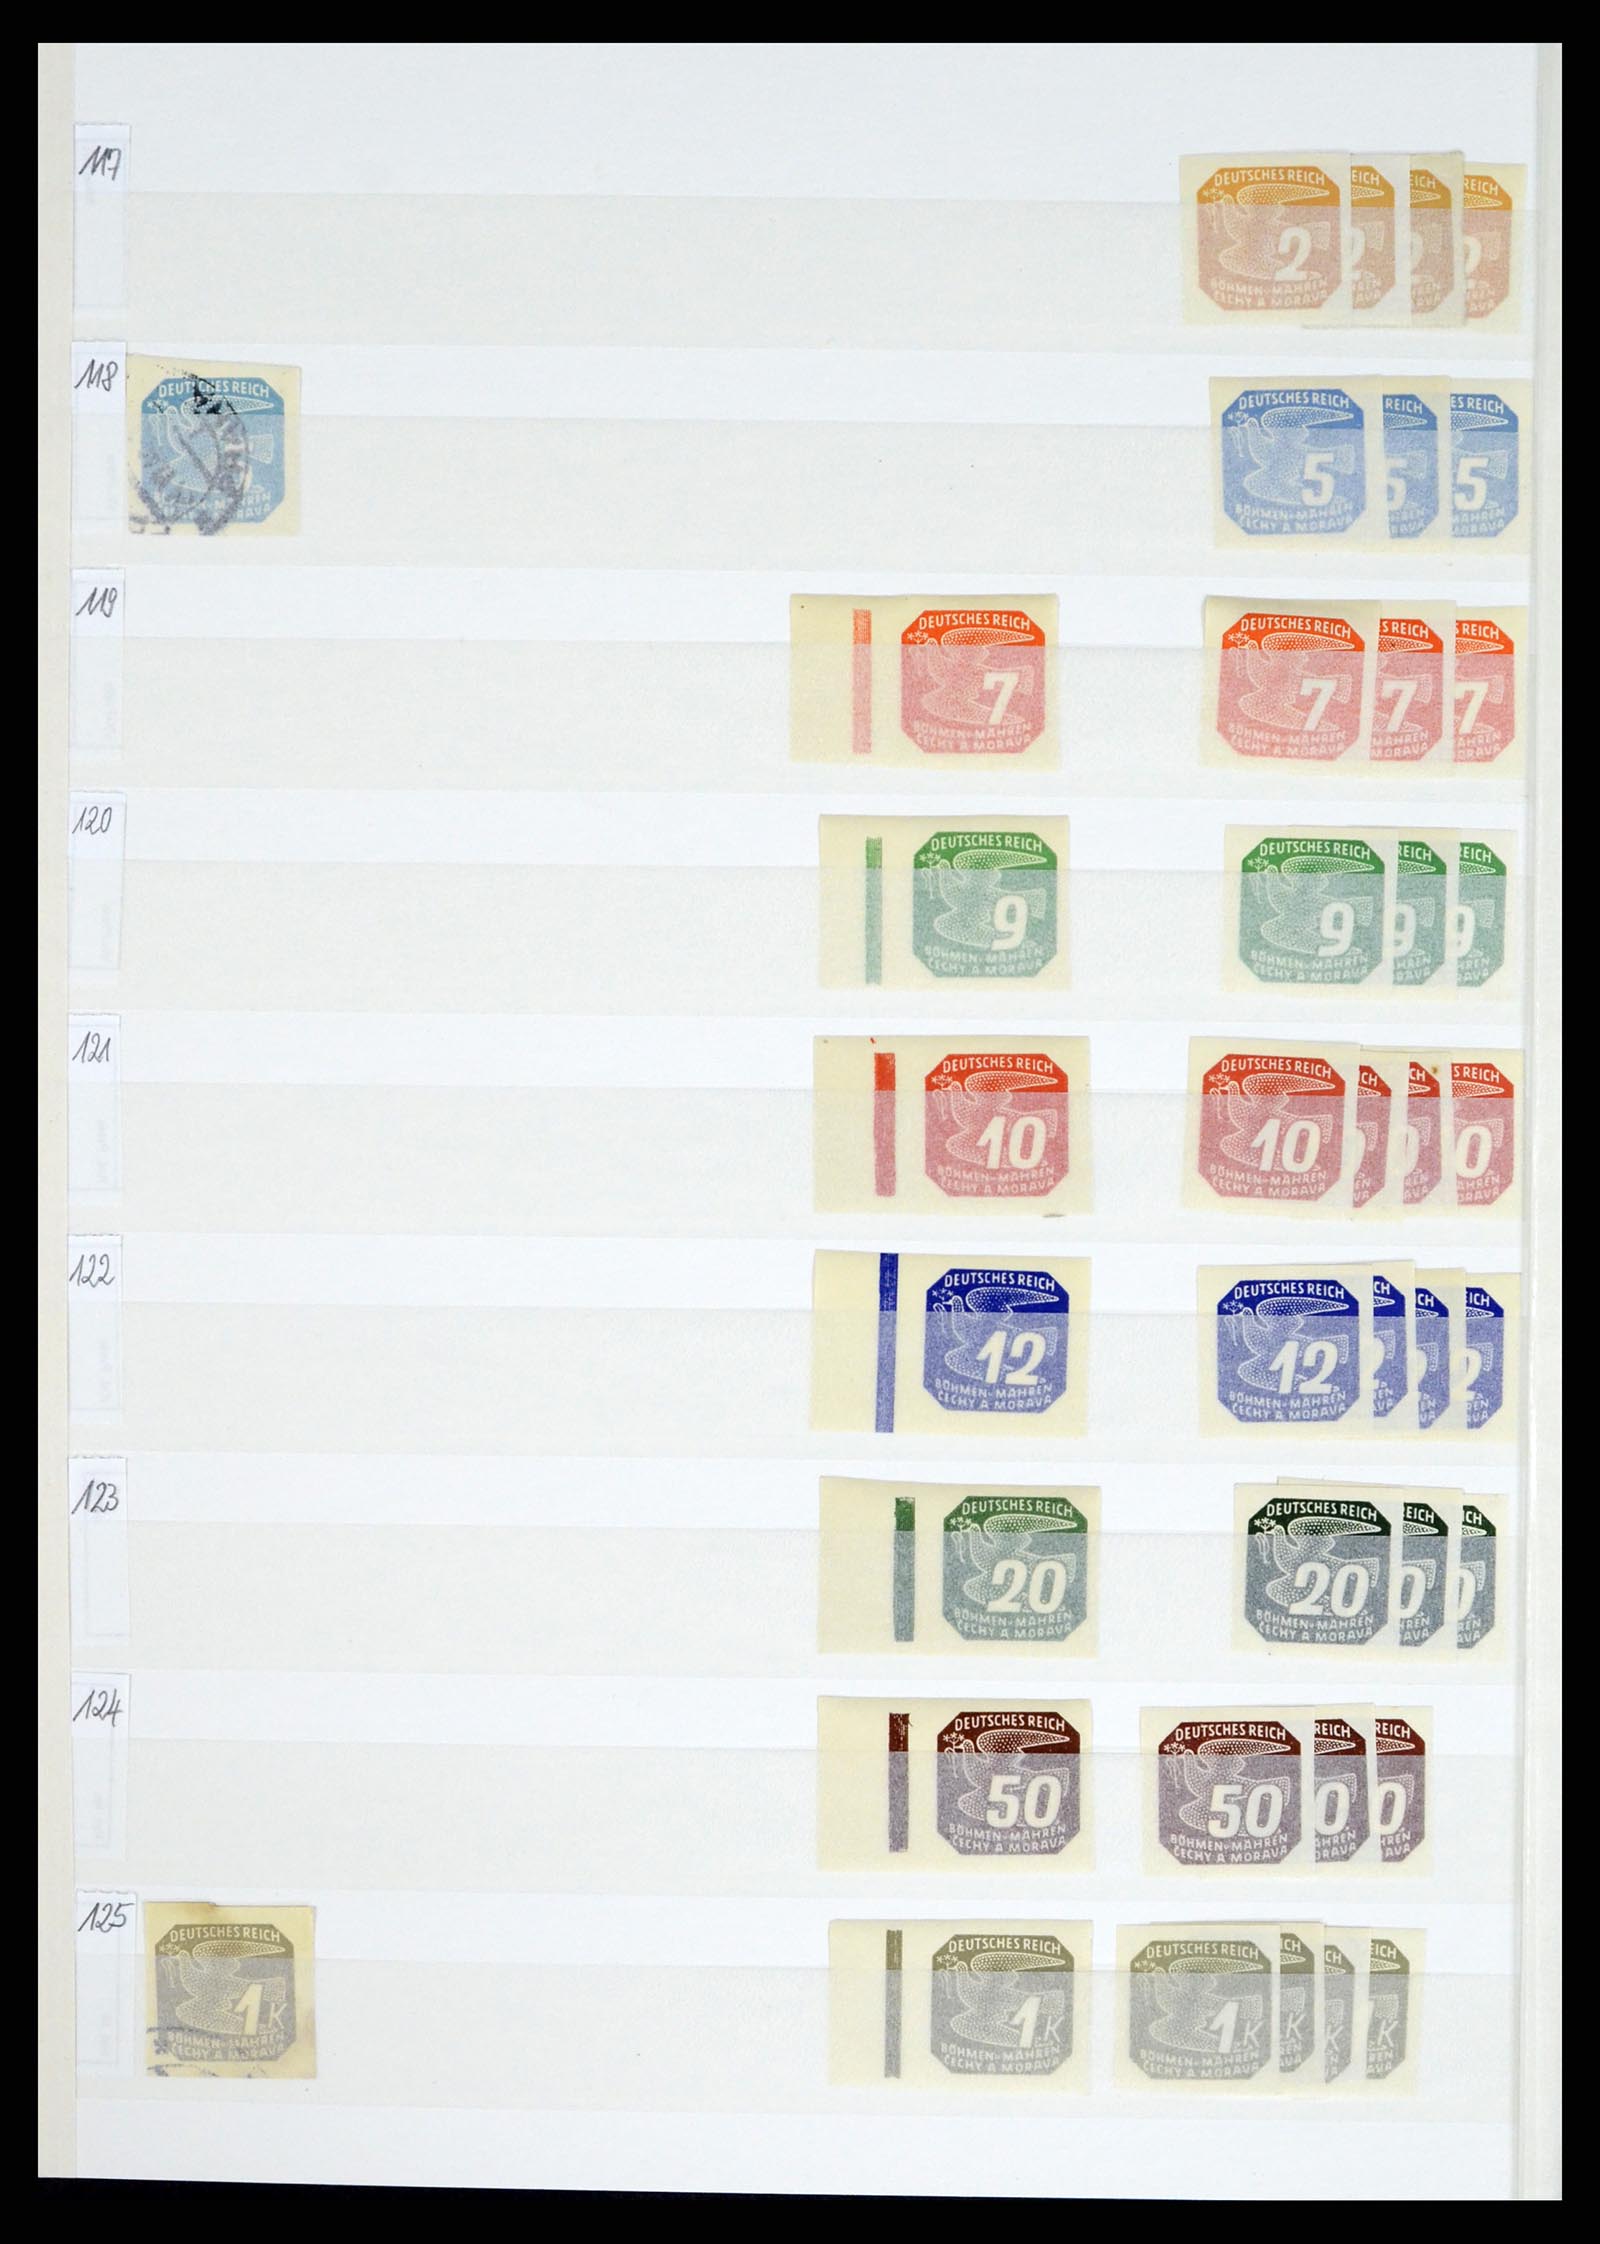 37534 362 - Stamp collection 37534 German territories and occupations 1920-1959.